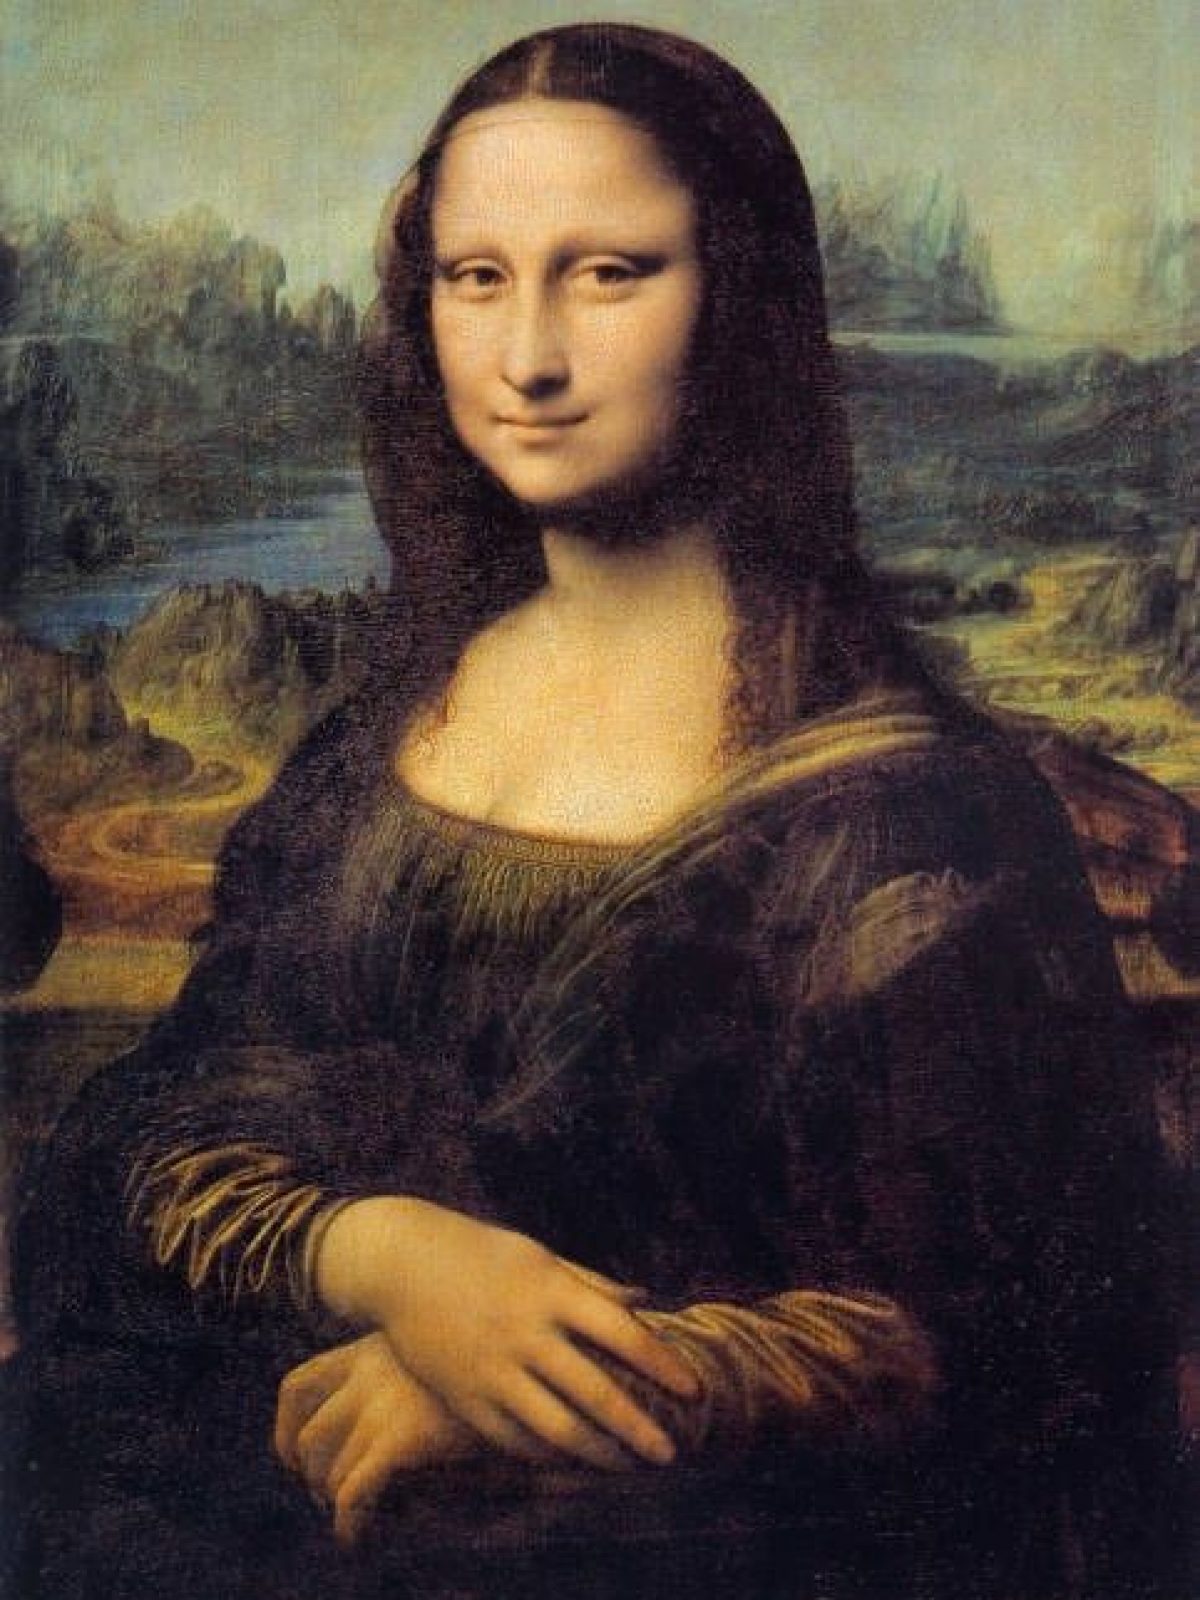 Mona Lisa - The Middle Page